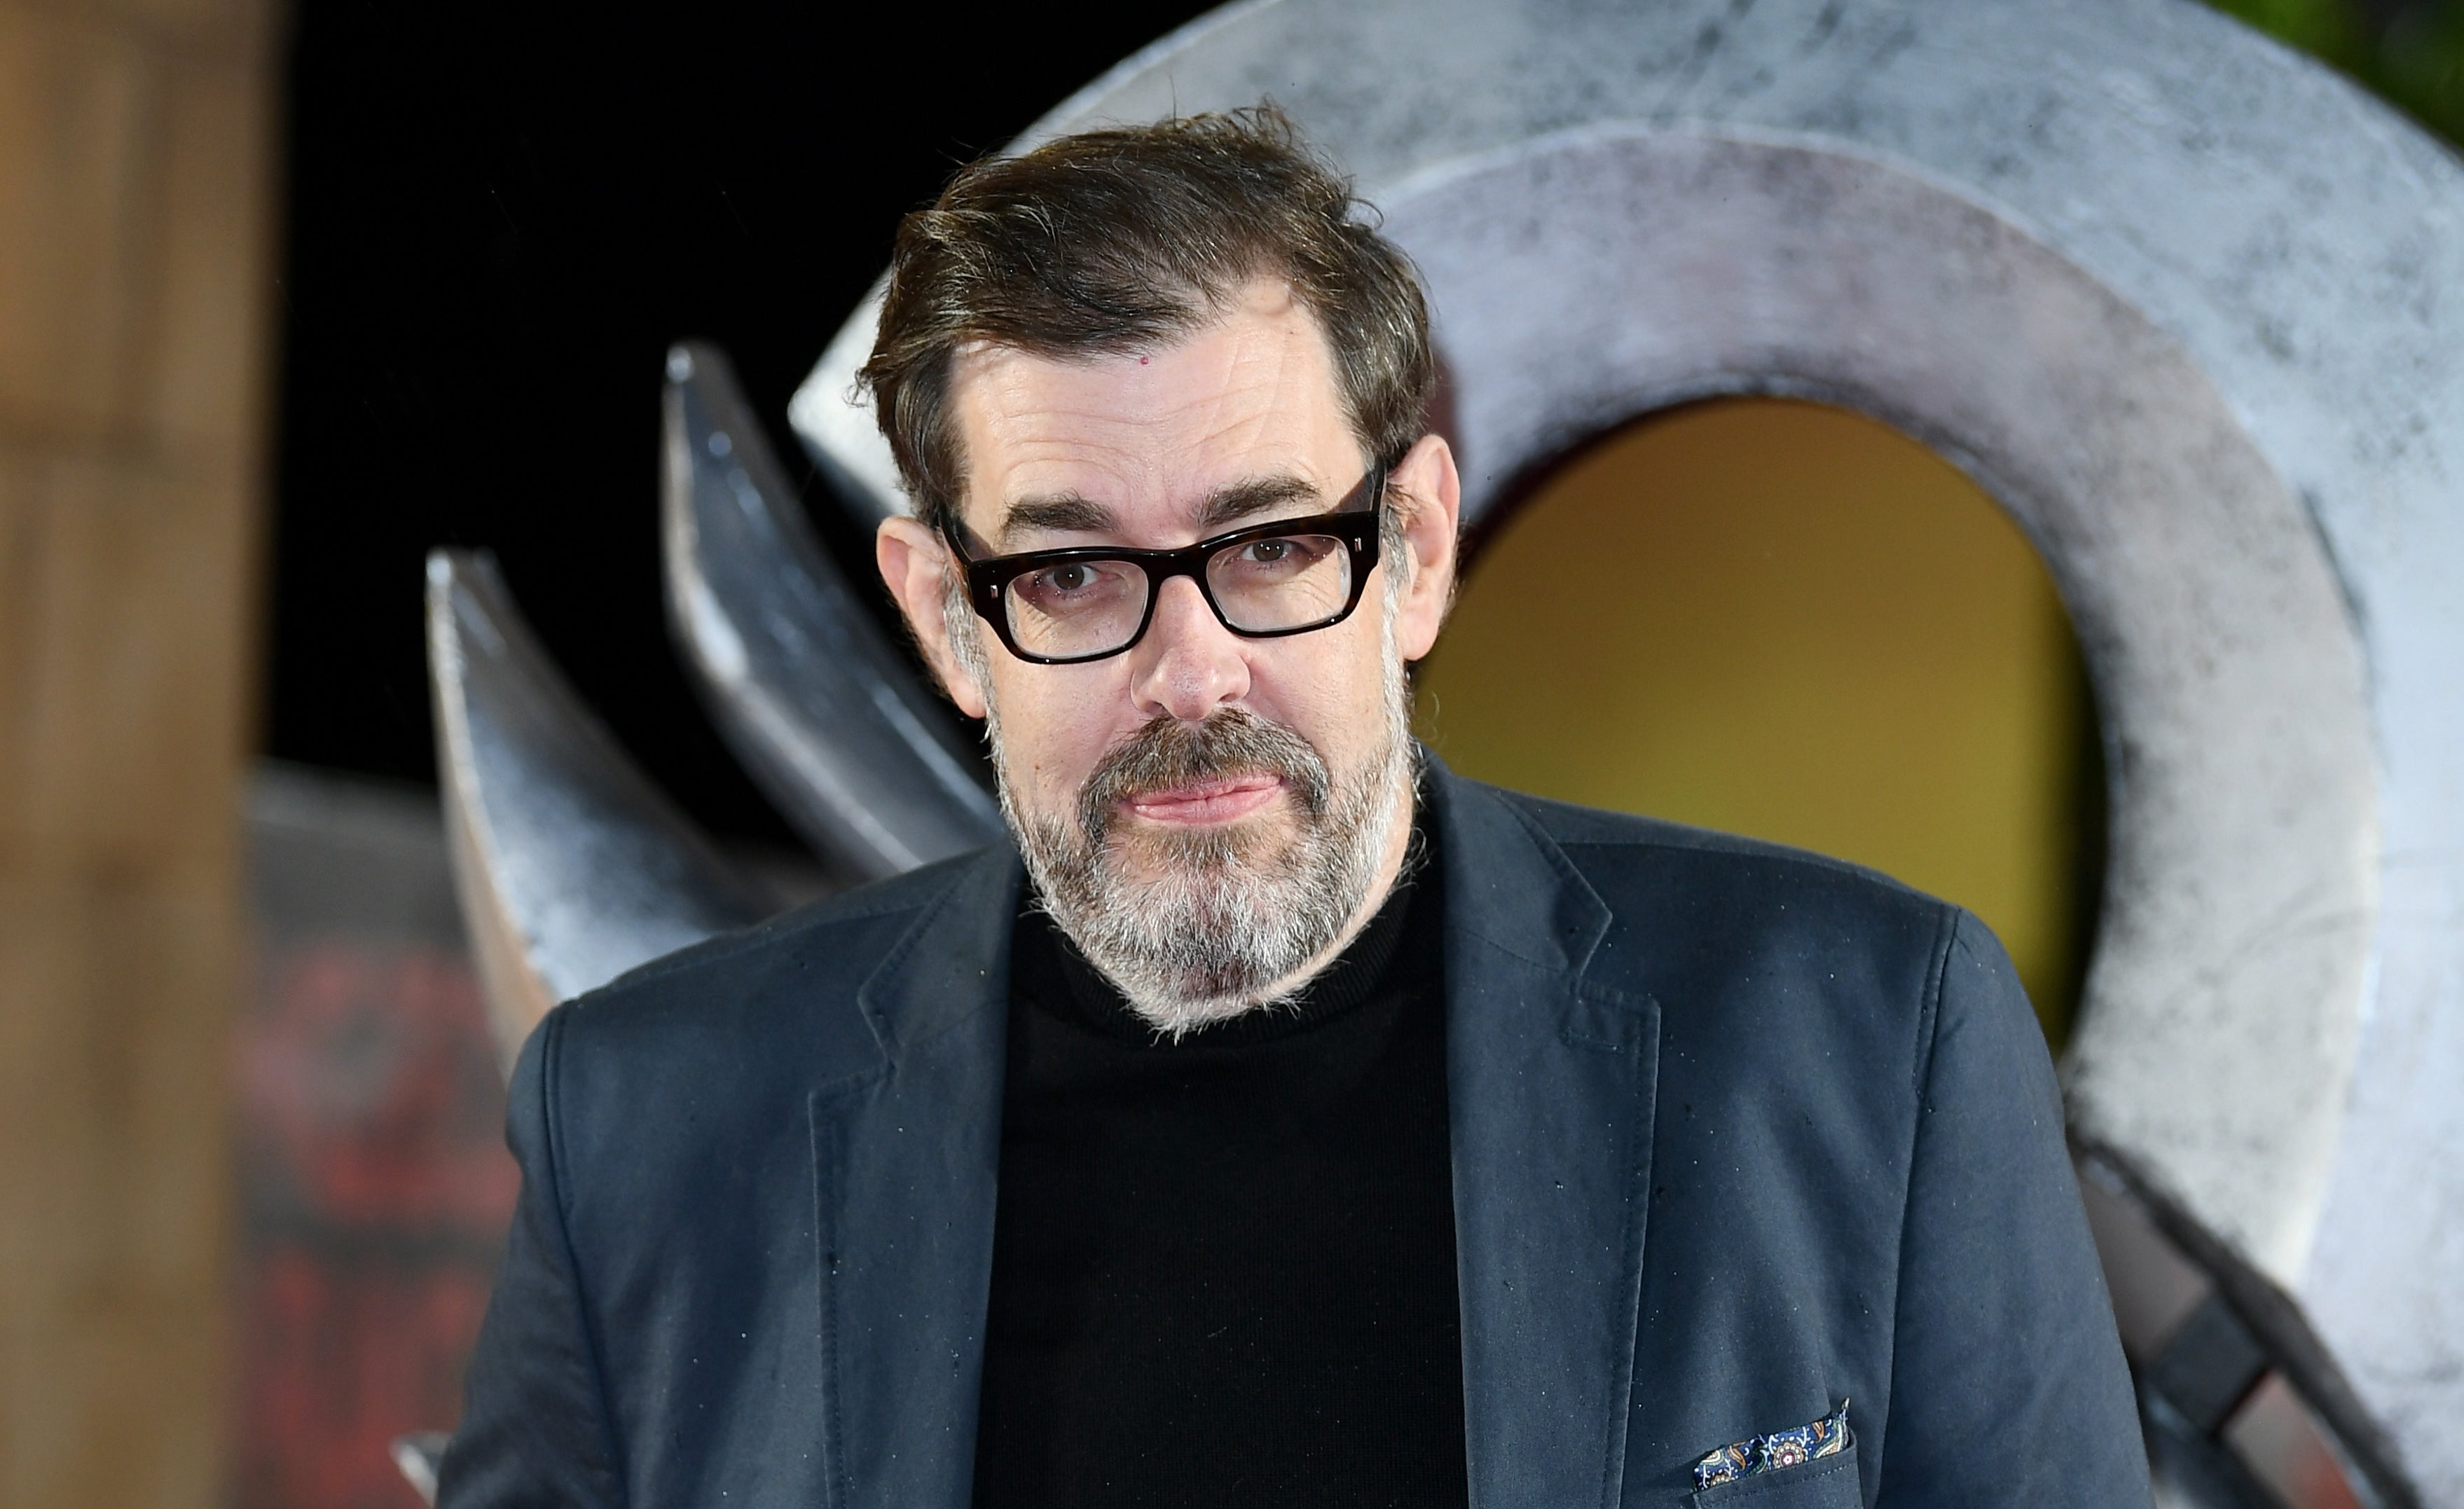 Richard Osman said that politics are ‘way beyond the scope of the entertainment industry’